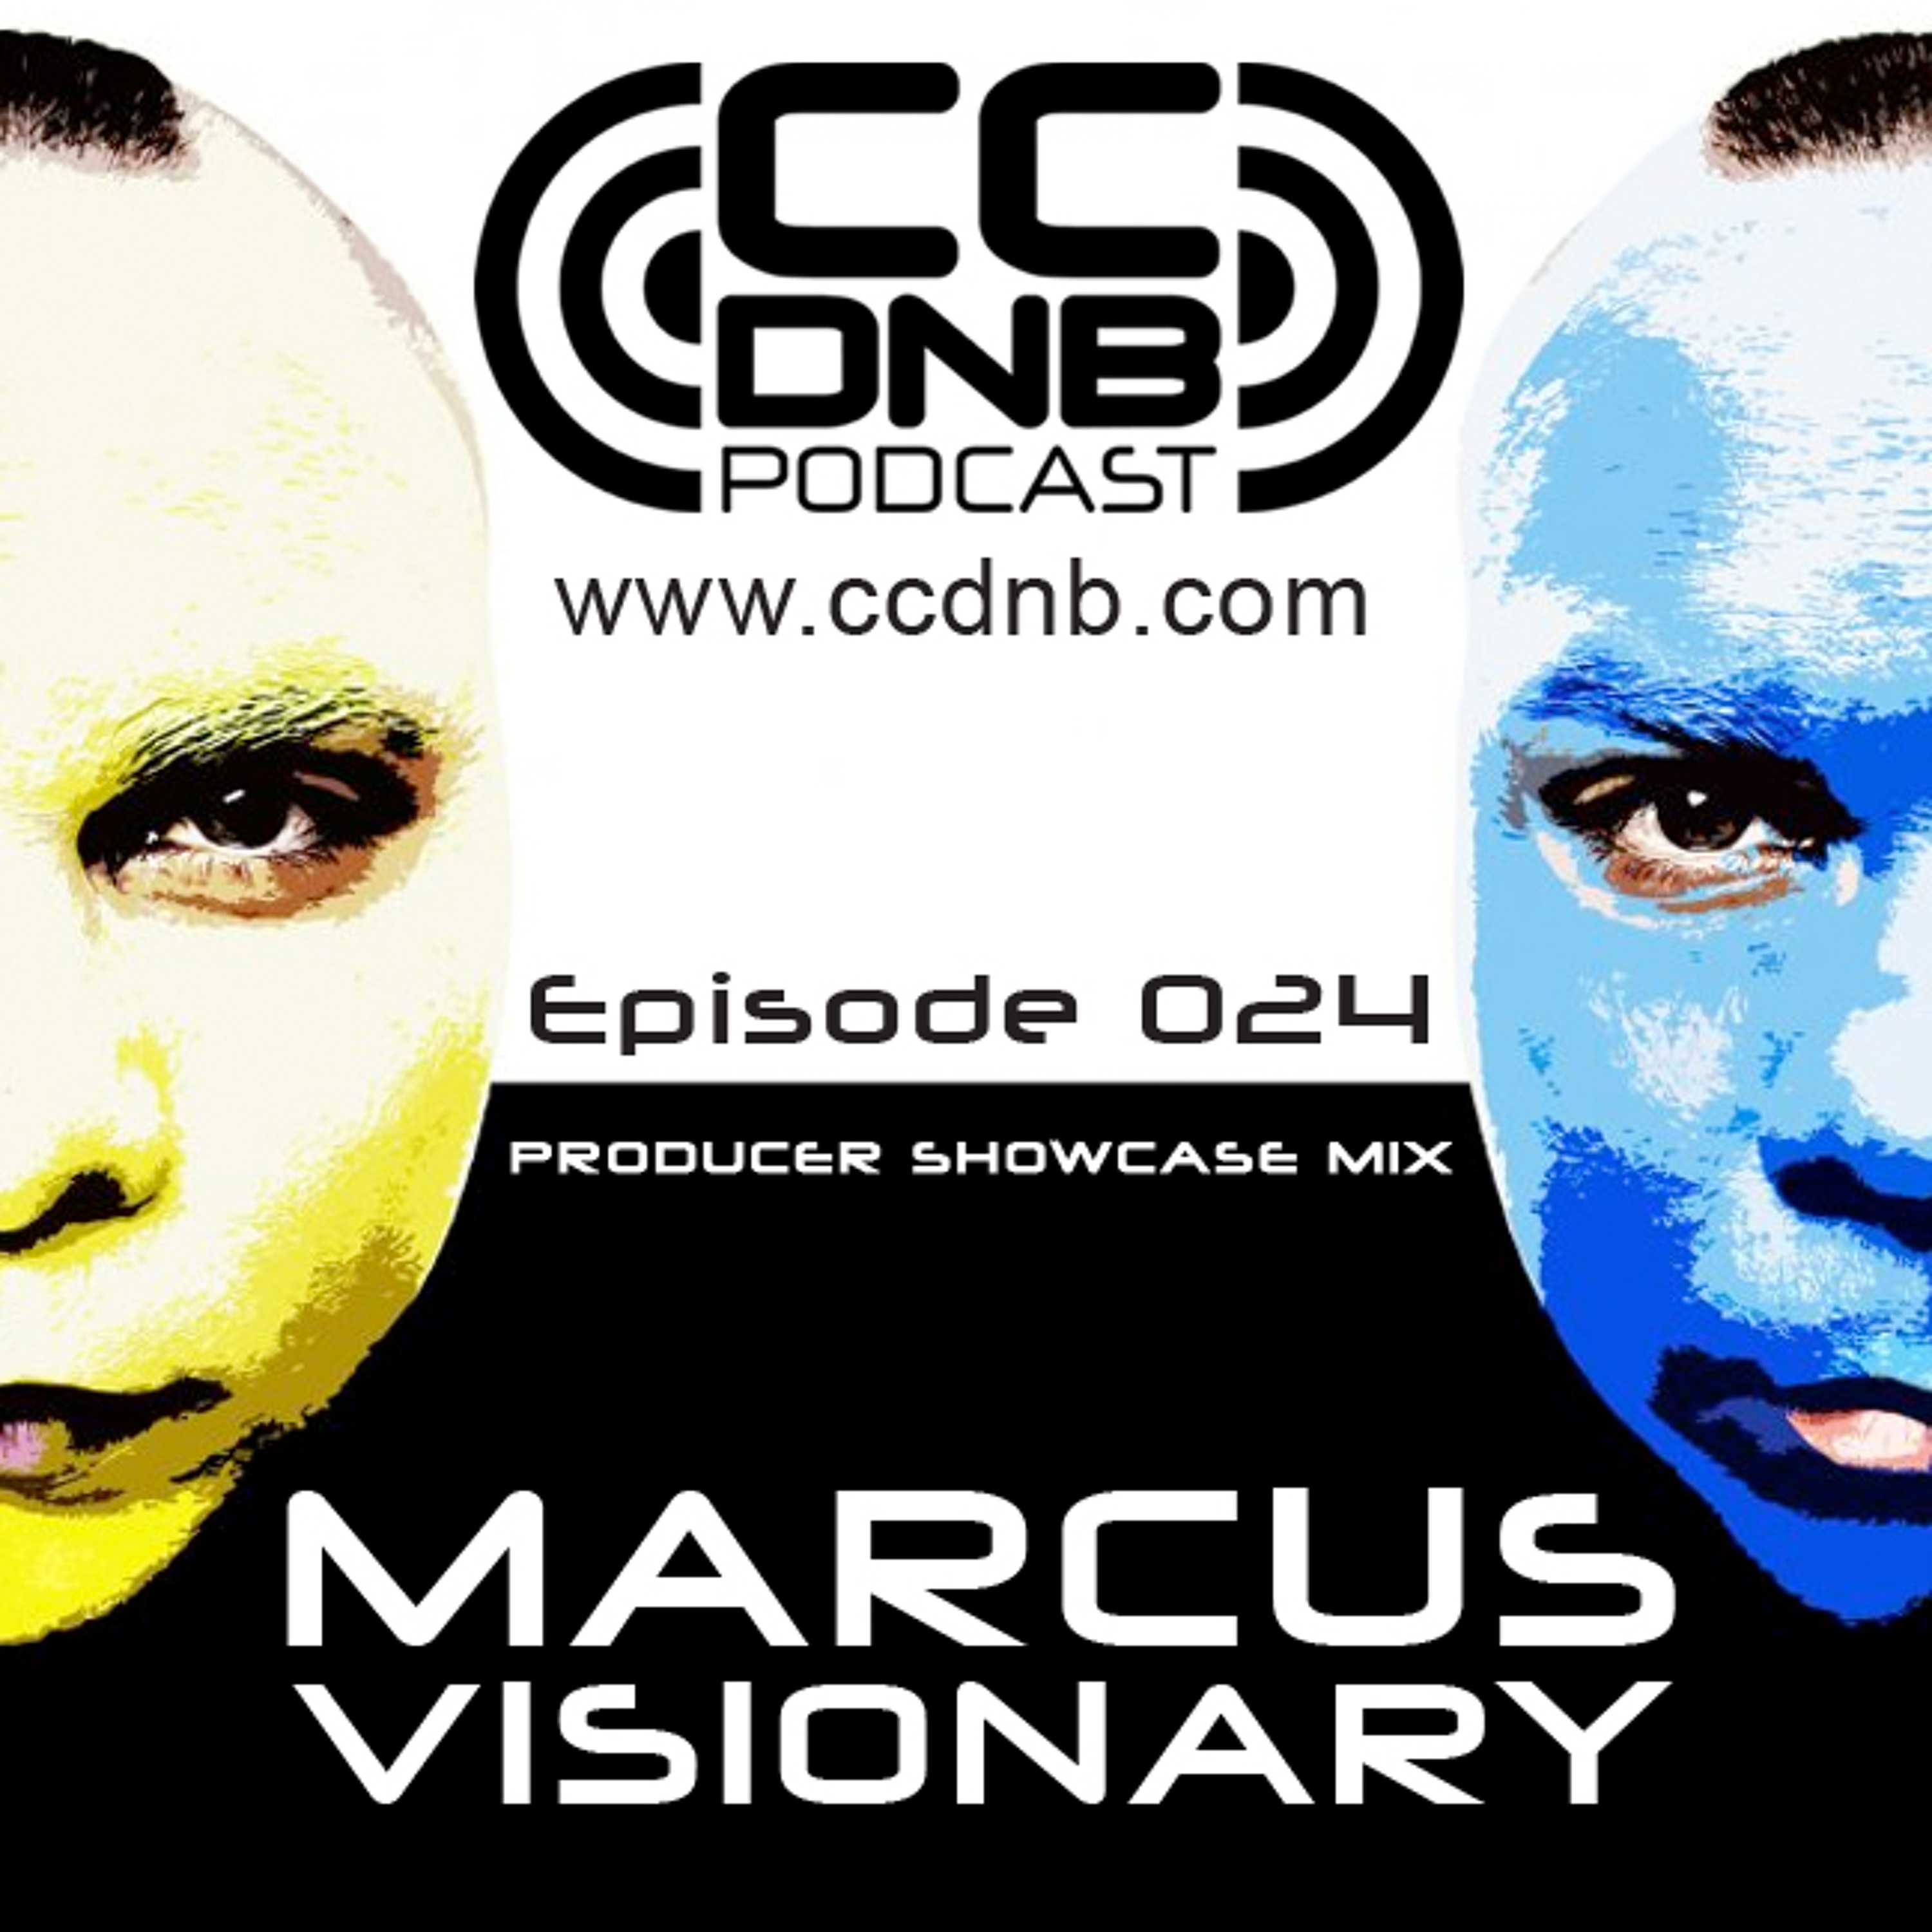 CCDNB 024 Producer Showcase Mix Featuring Marcus Visionary